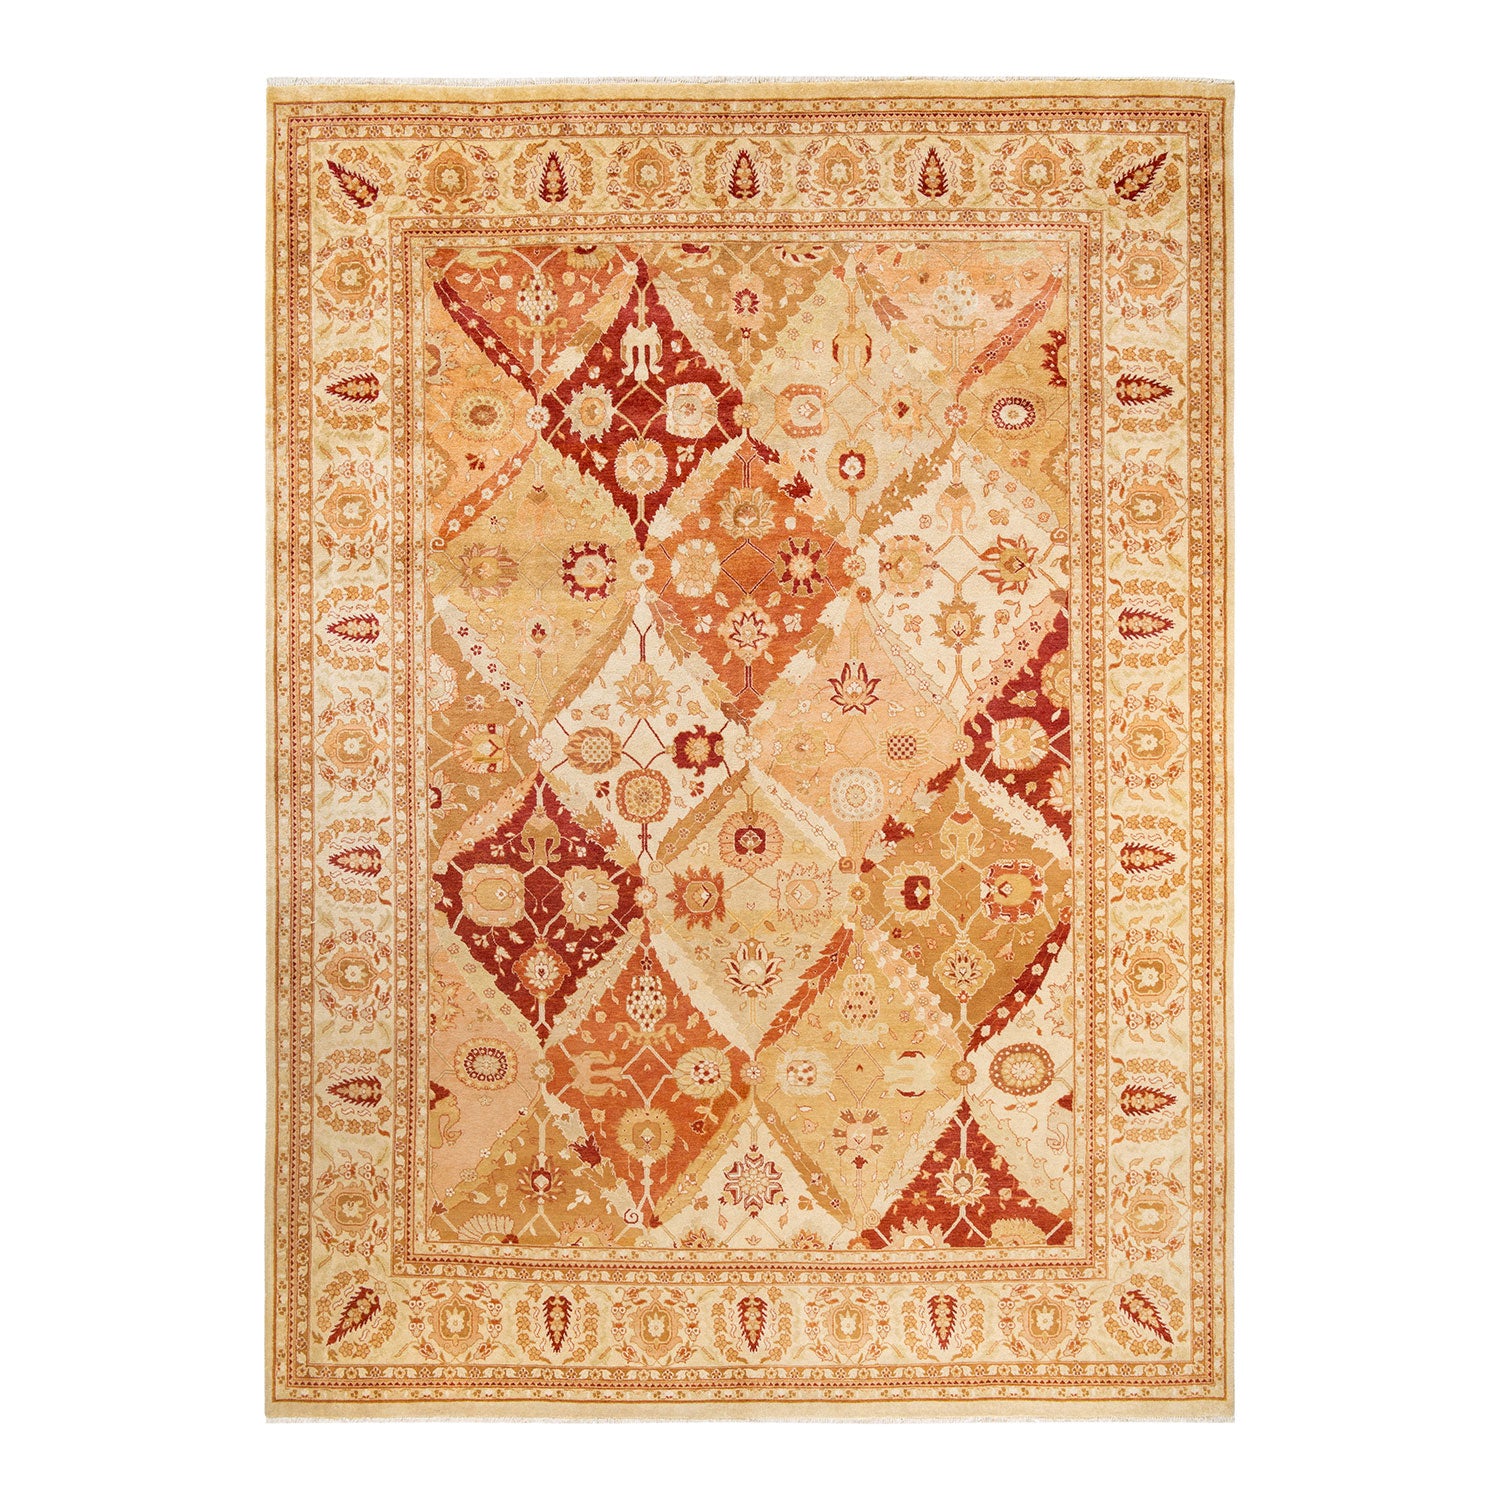 Eclectic, One-of-a-Kind Hand-Knotted Area Rug  - Ivory, 9' 2" x 12' 6" Default Title